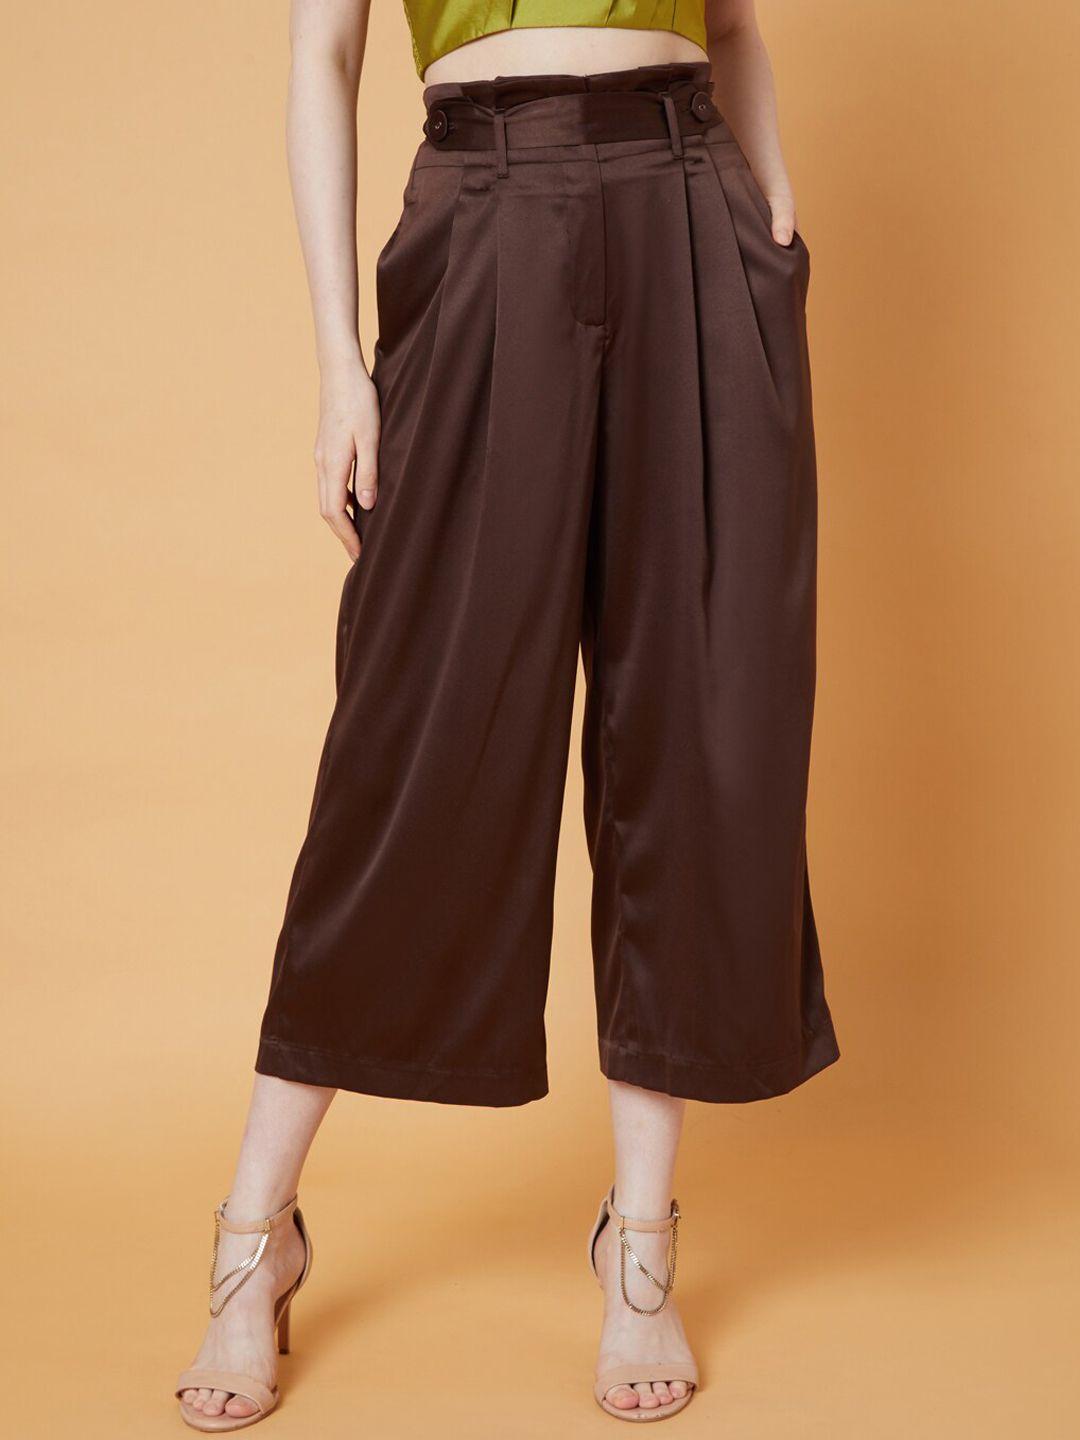 vero-moda-marquee-collection-women-brown-high-rise-pleated-culottes-trousers